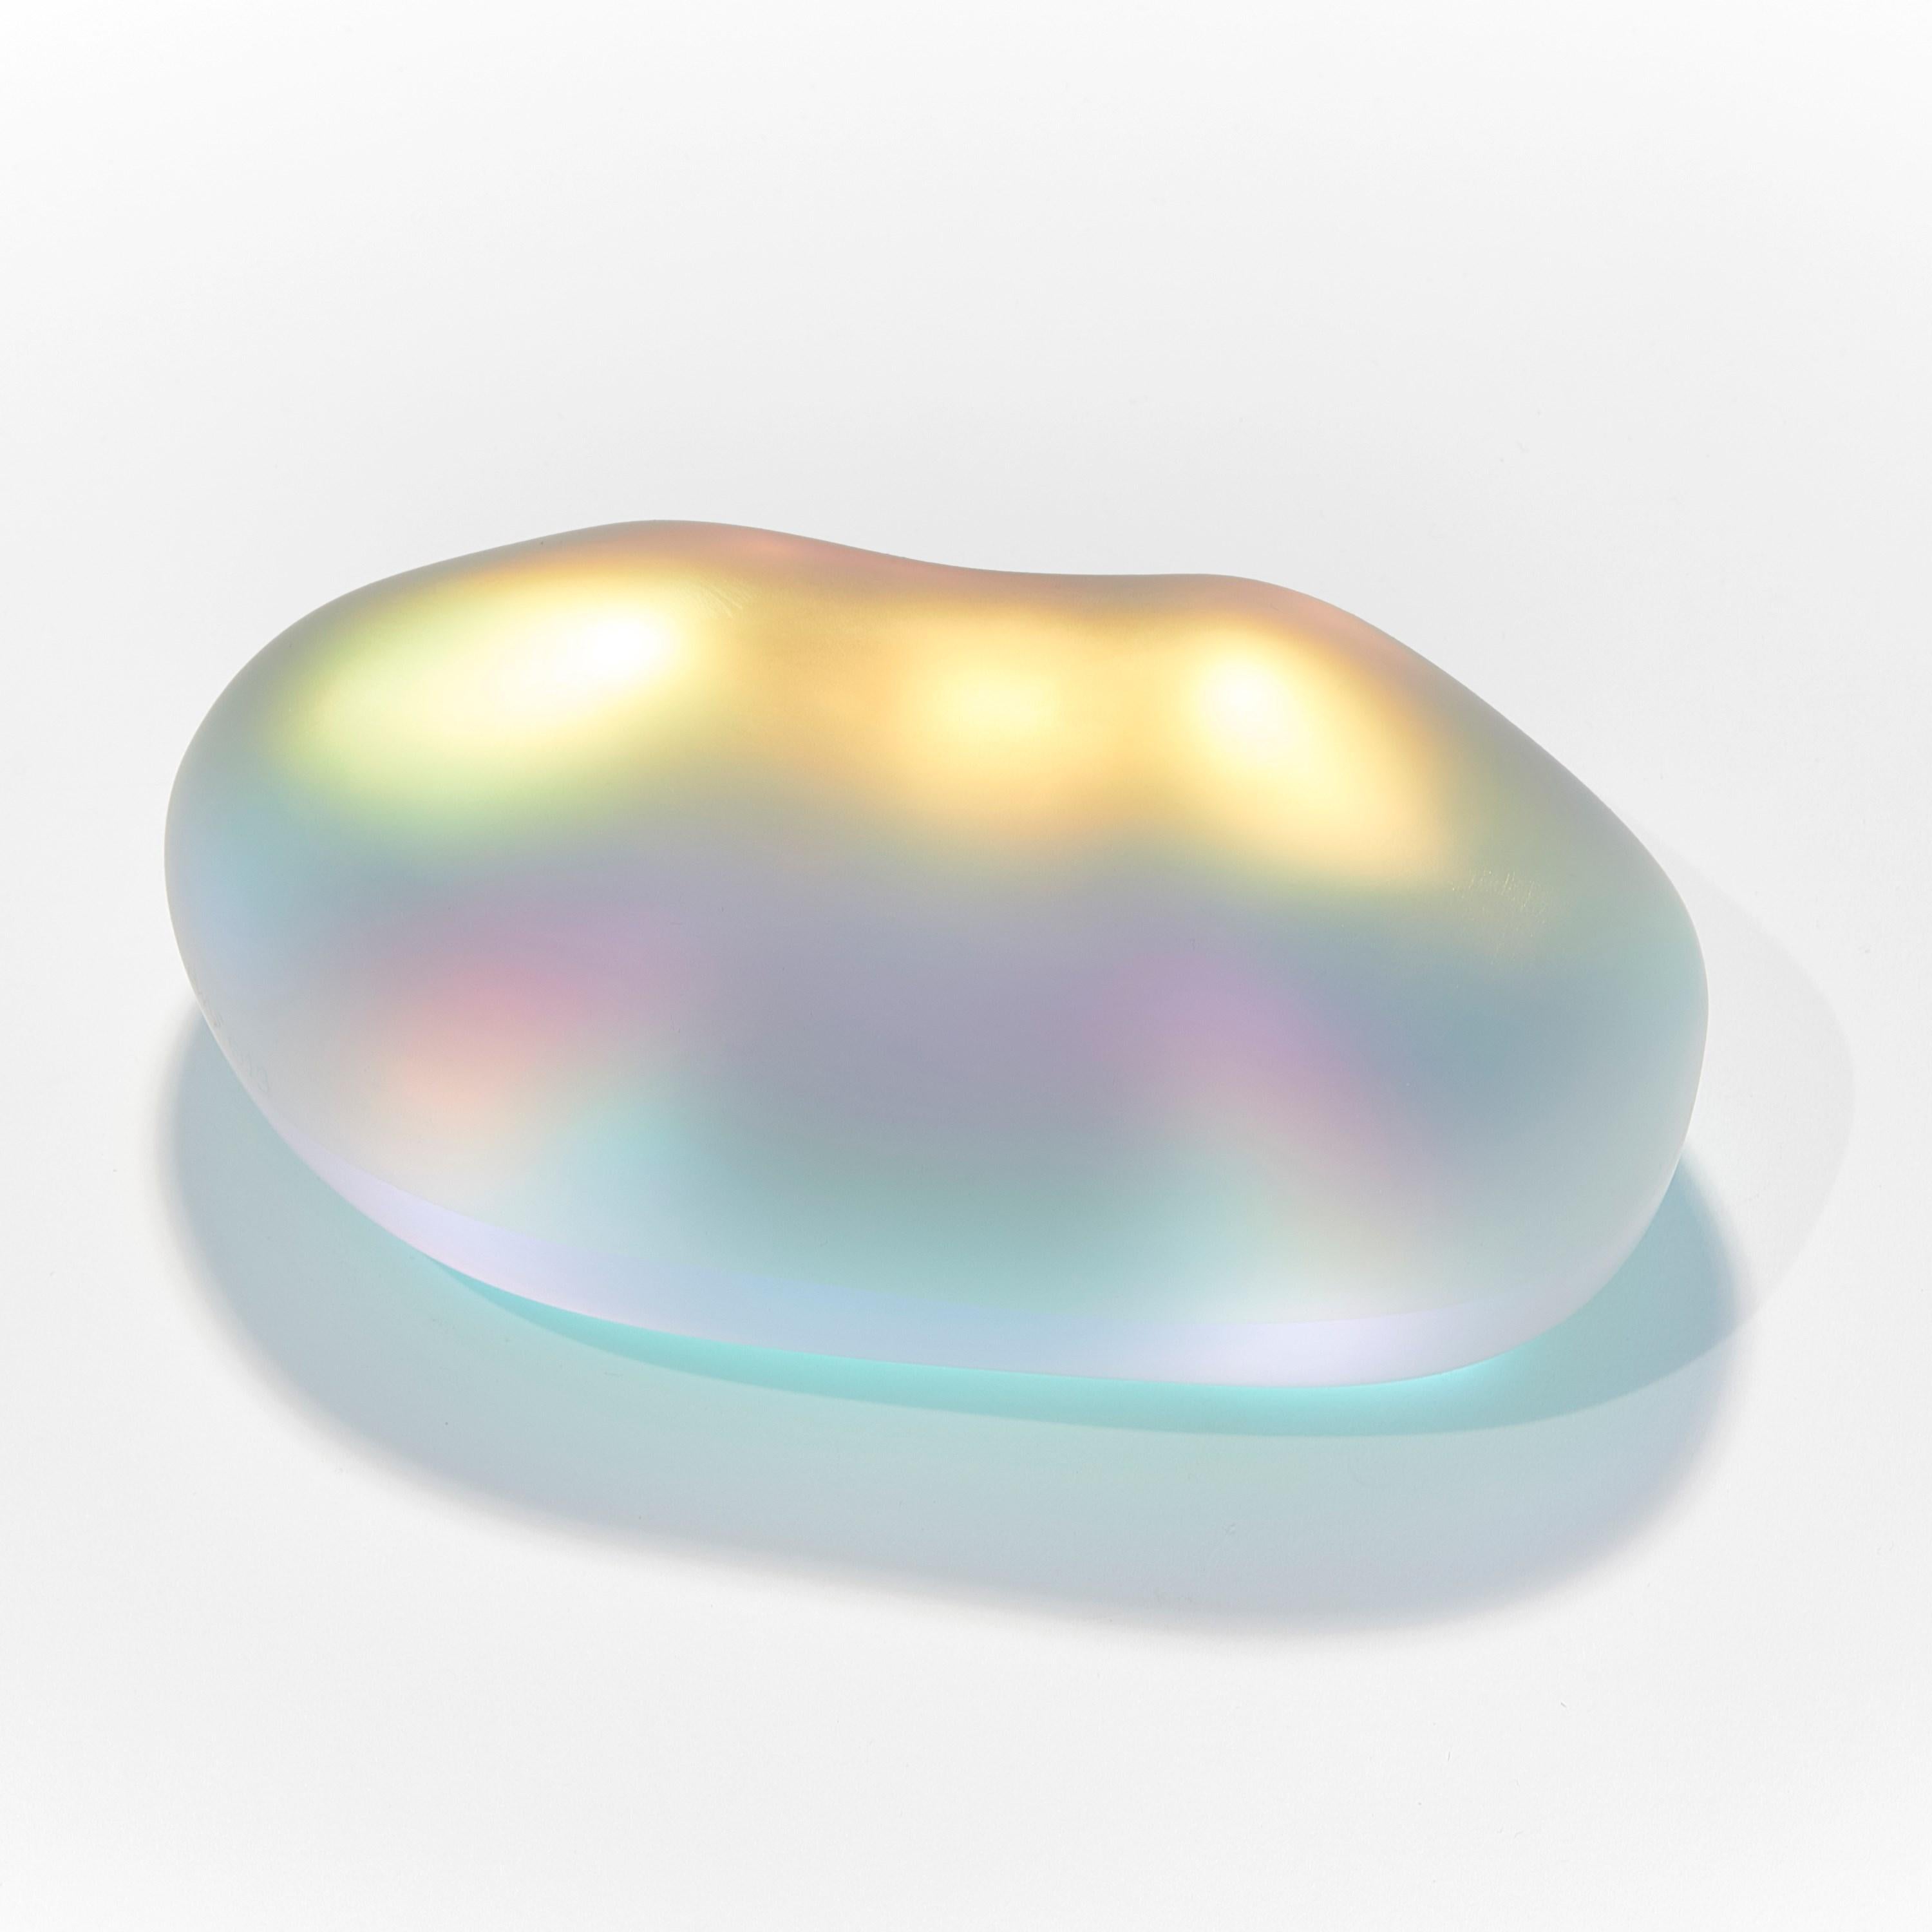 British  Moon-rock 013, clear glass sculptural rock with iridescent colours by Jon Lewis